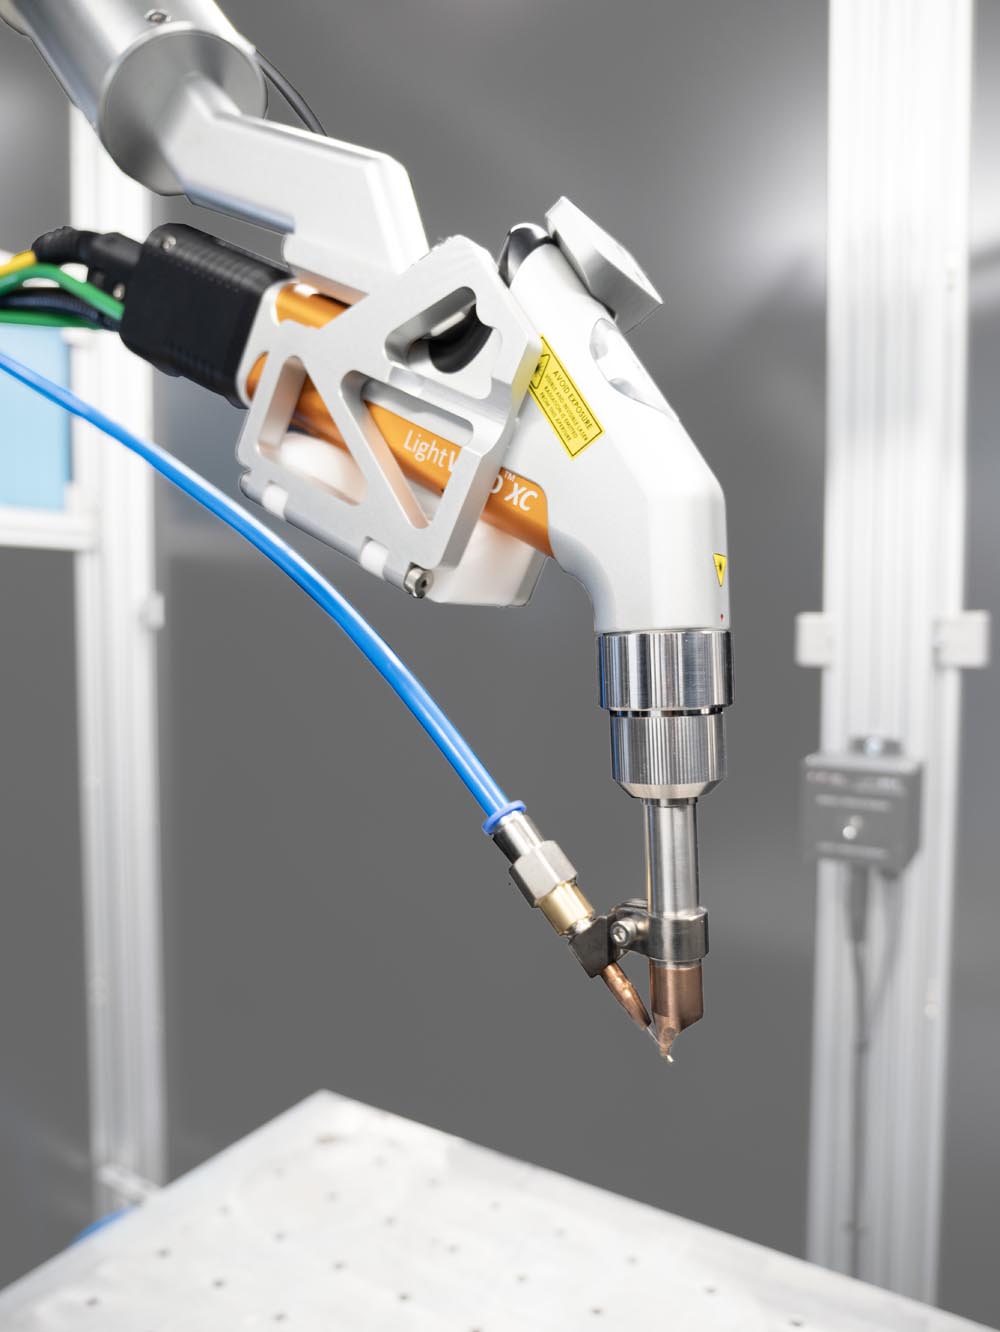 Olympus Technologies has launched the UK’s first Universal Robot cobot laser welding solution. Based on our proven MIG and TIG cobot software, the solution offers faster high-quality robot welding than MIG or TIG is able to offer.